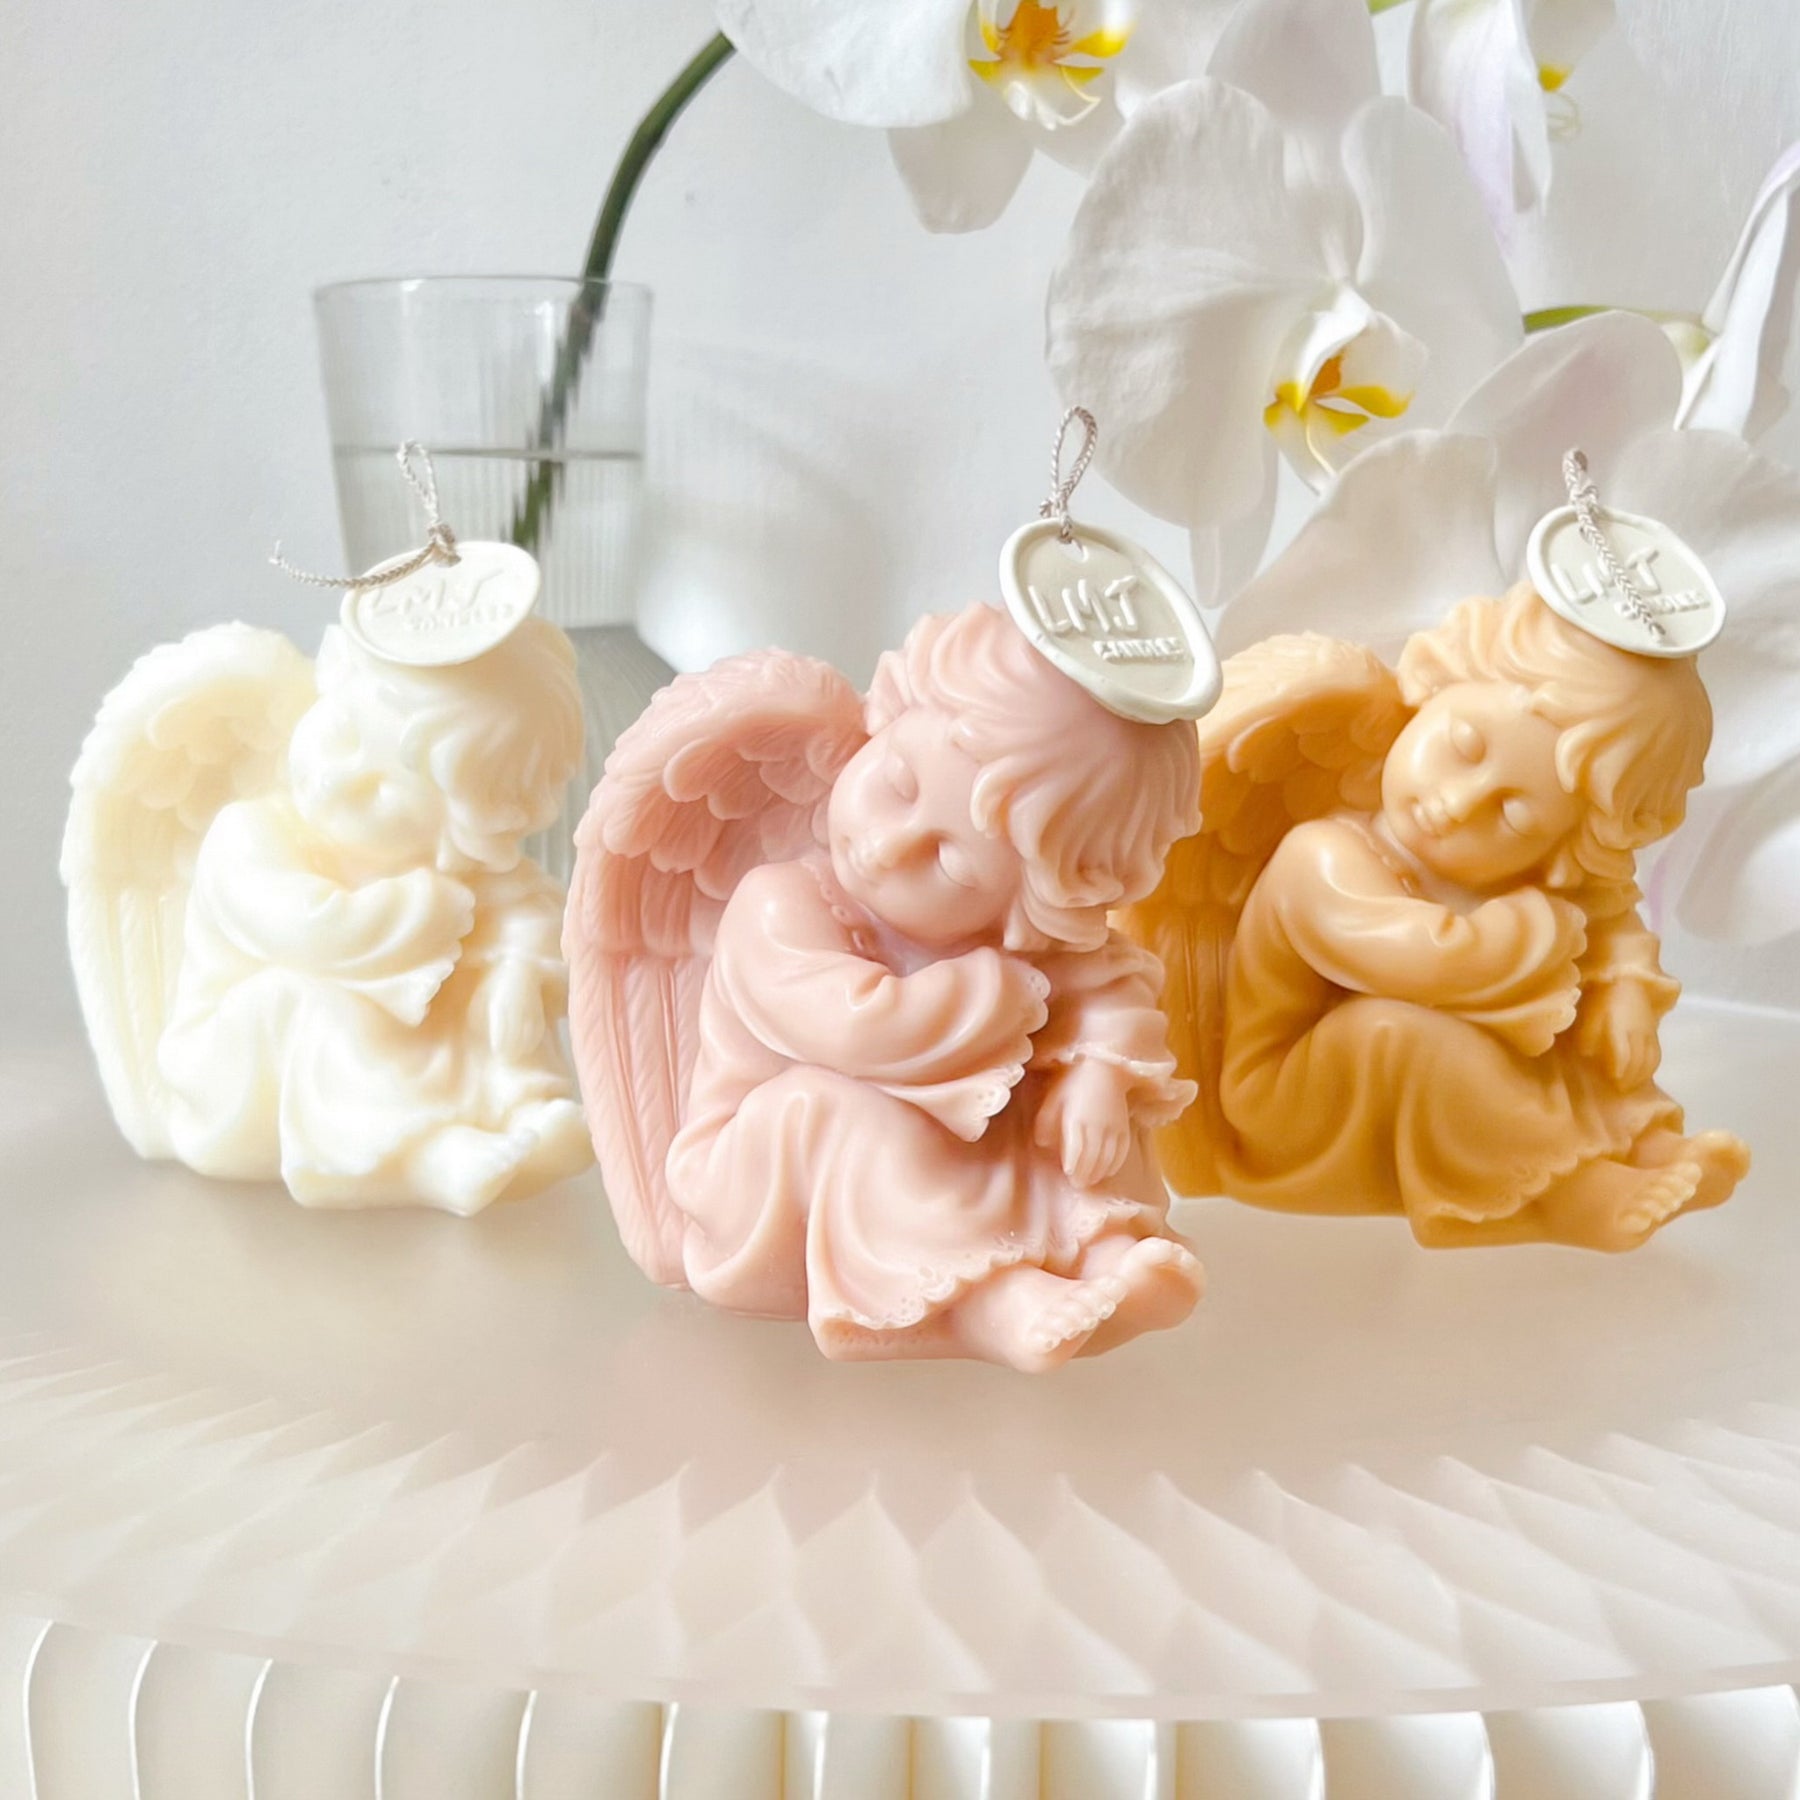 Winged Cherub Scented Soy Candle, Angel Candle - LMJ Candles